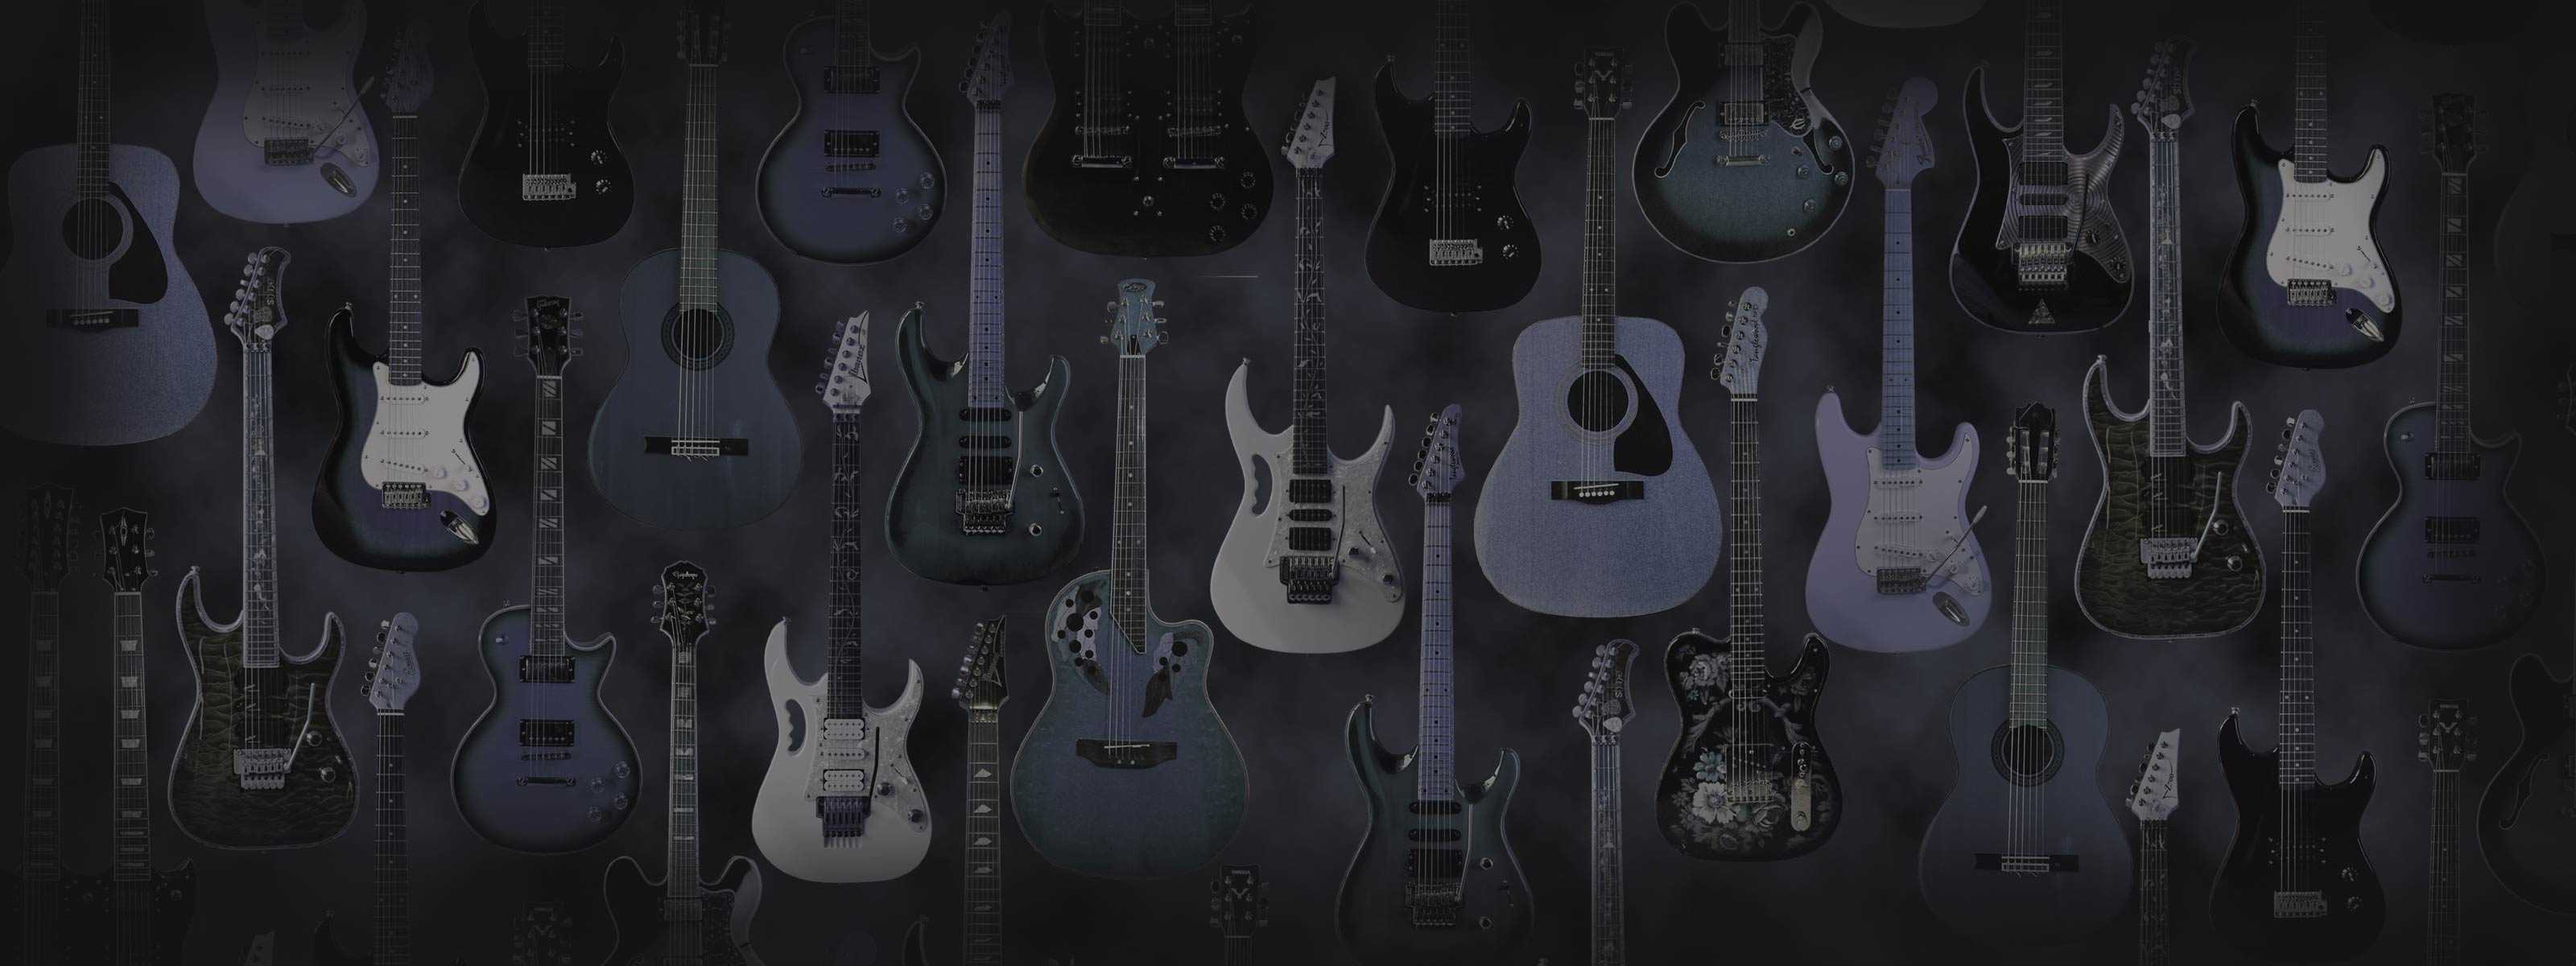 Dual monitor guitar wallpapers, from GCH Guitar Academy